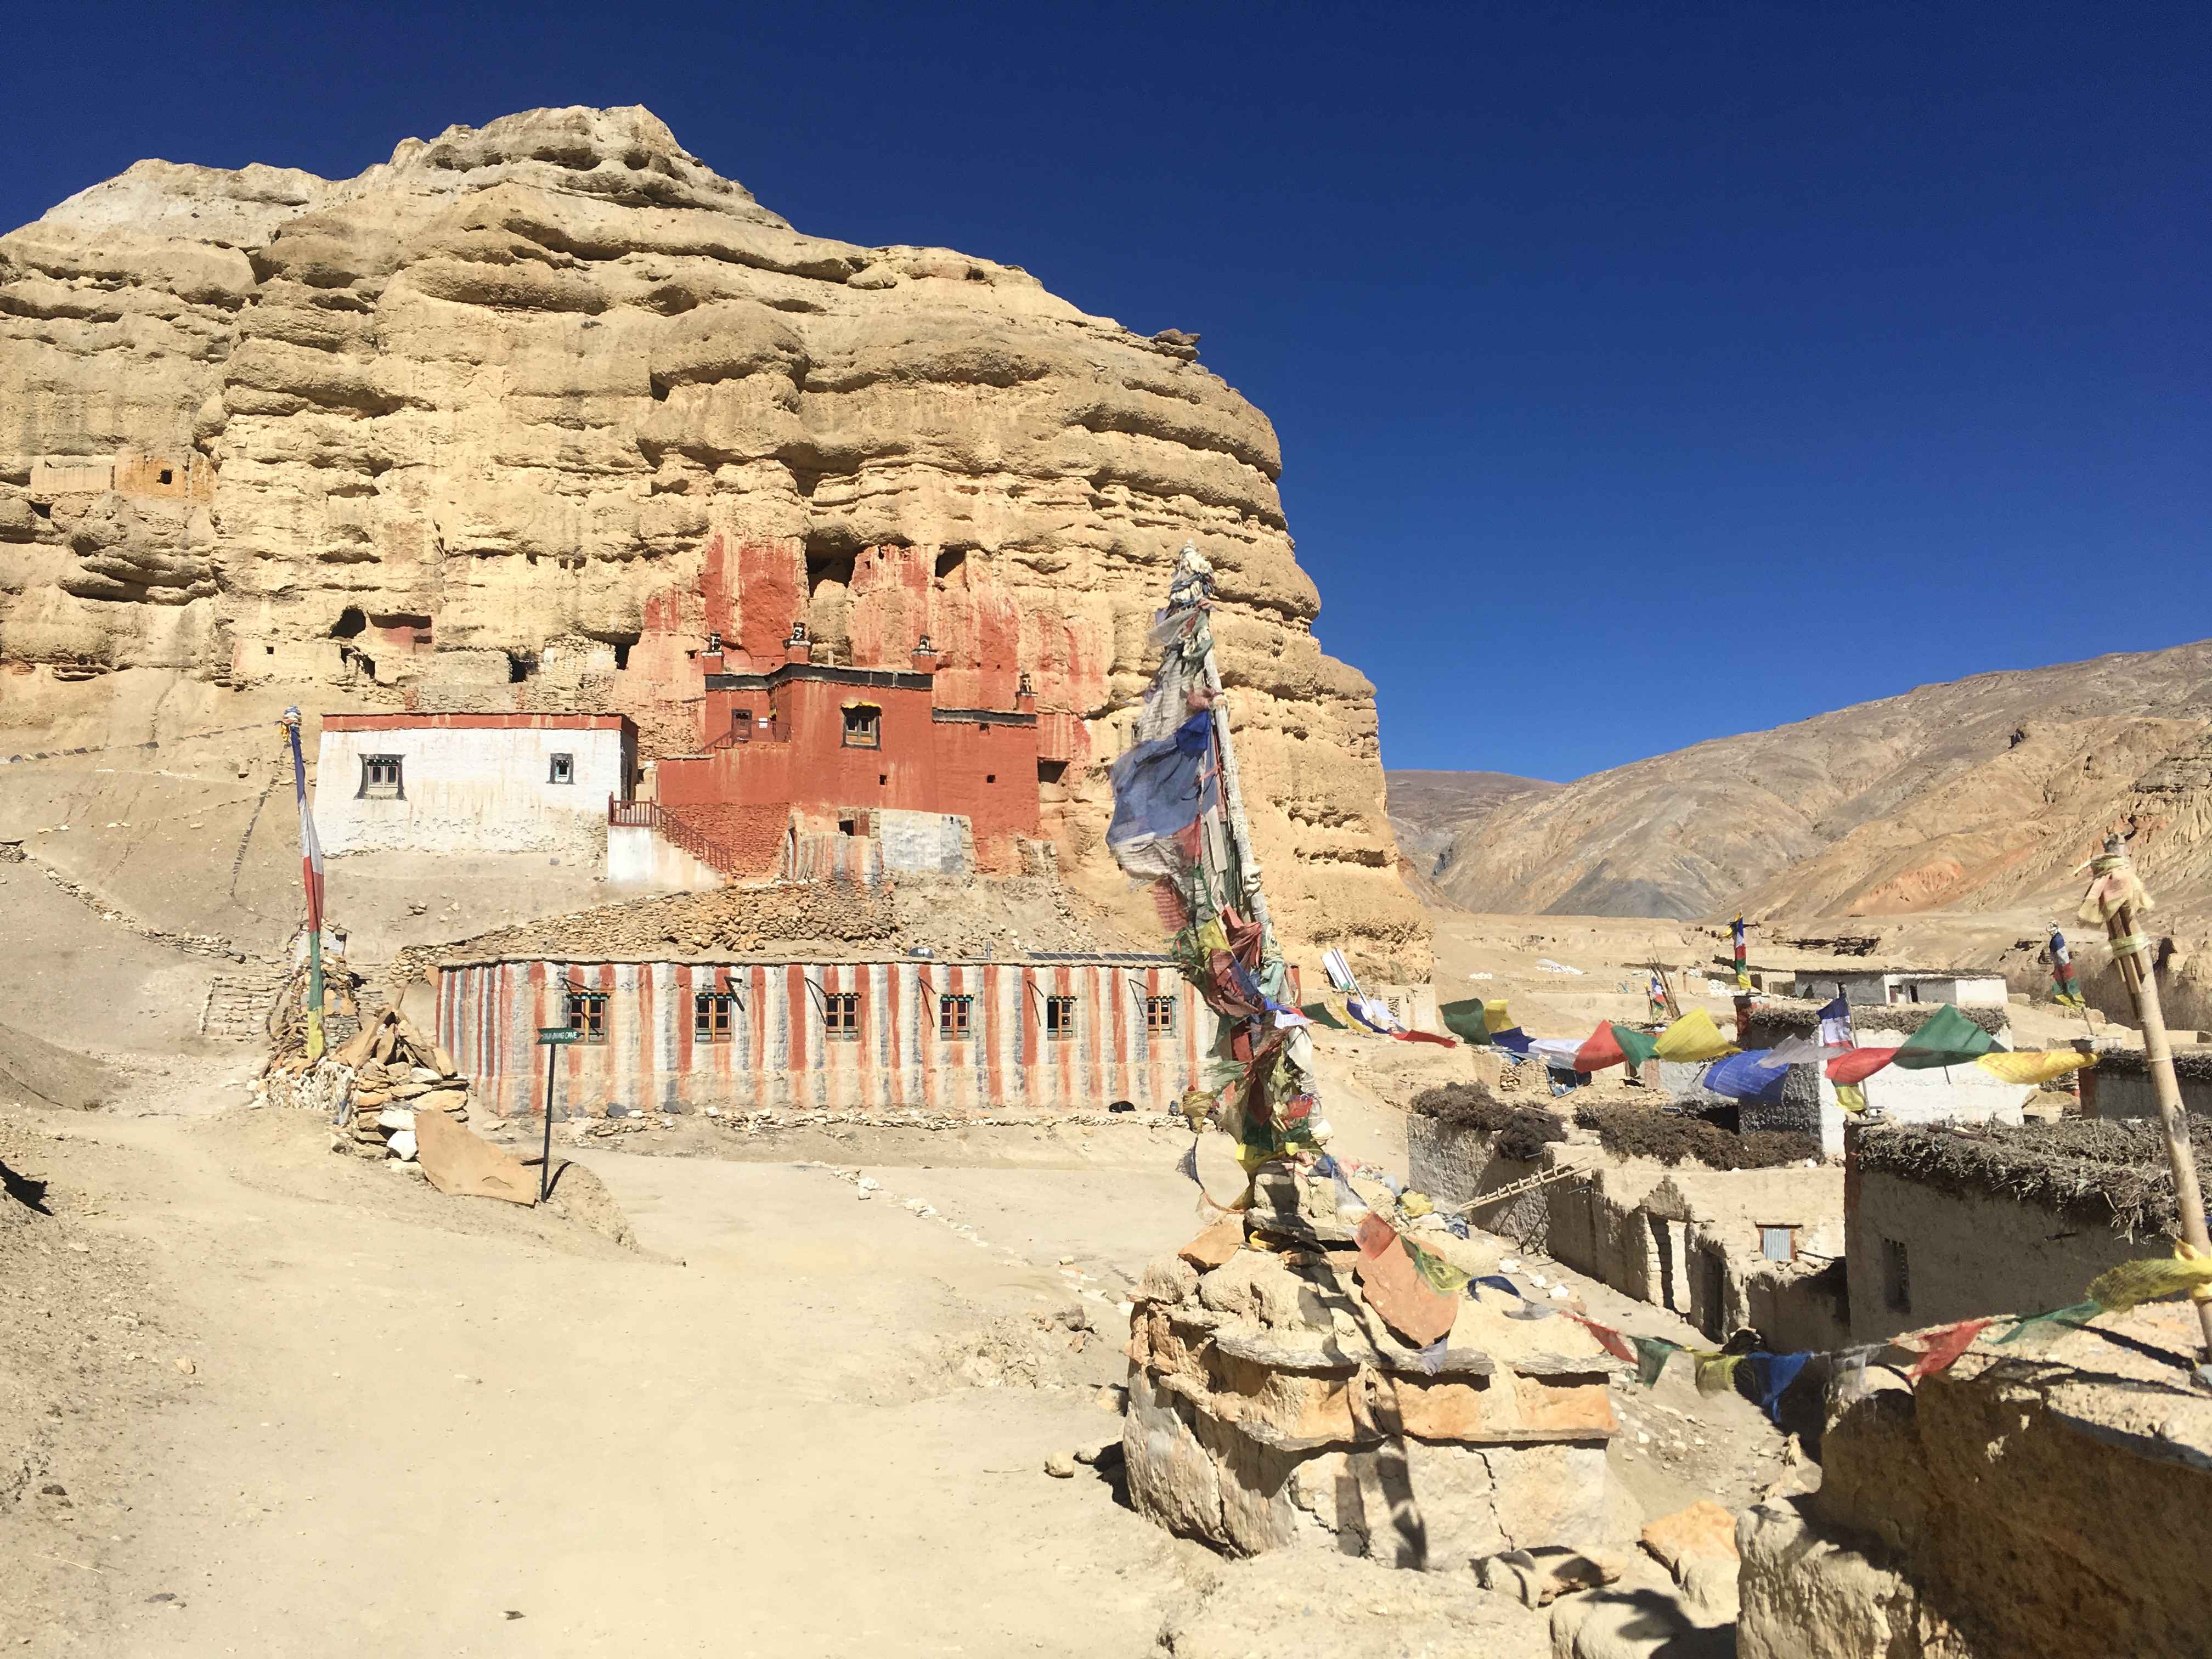 The Niphu Monastery in red color, of Chosser, Mustang is the only monastery which is caved inside a huge cliff.